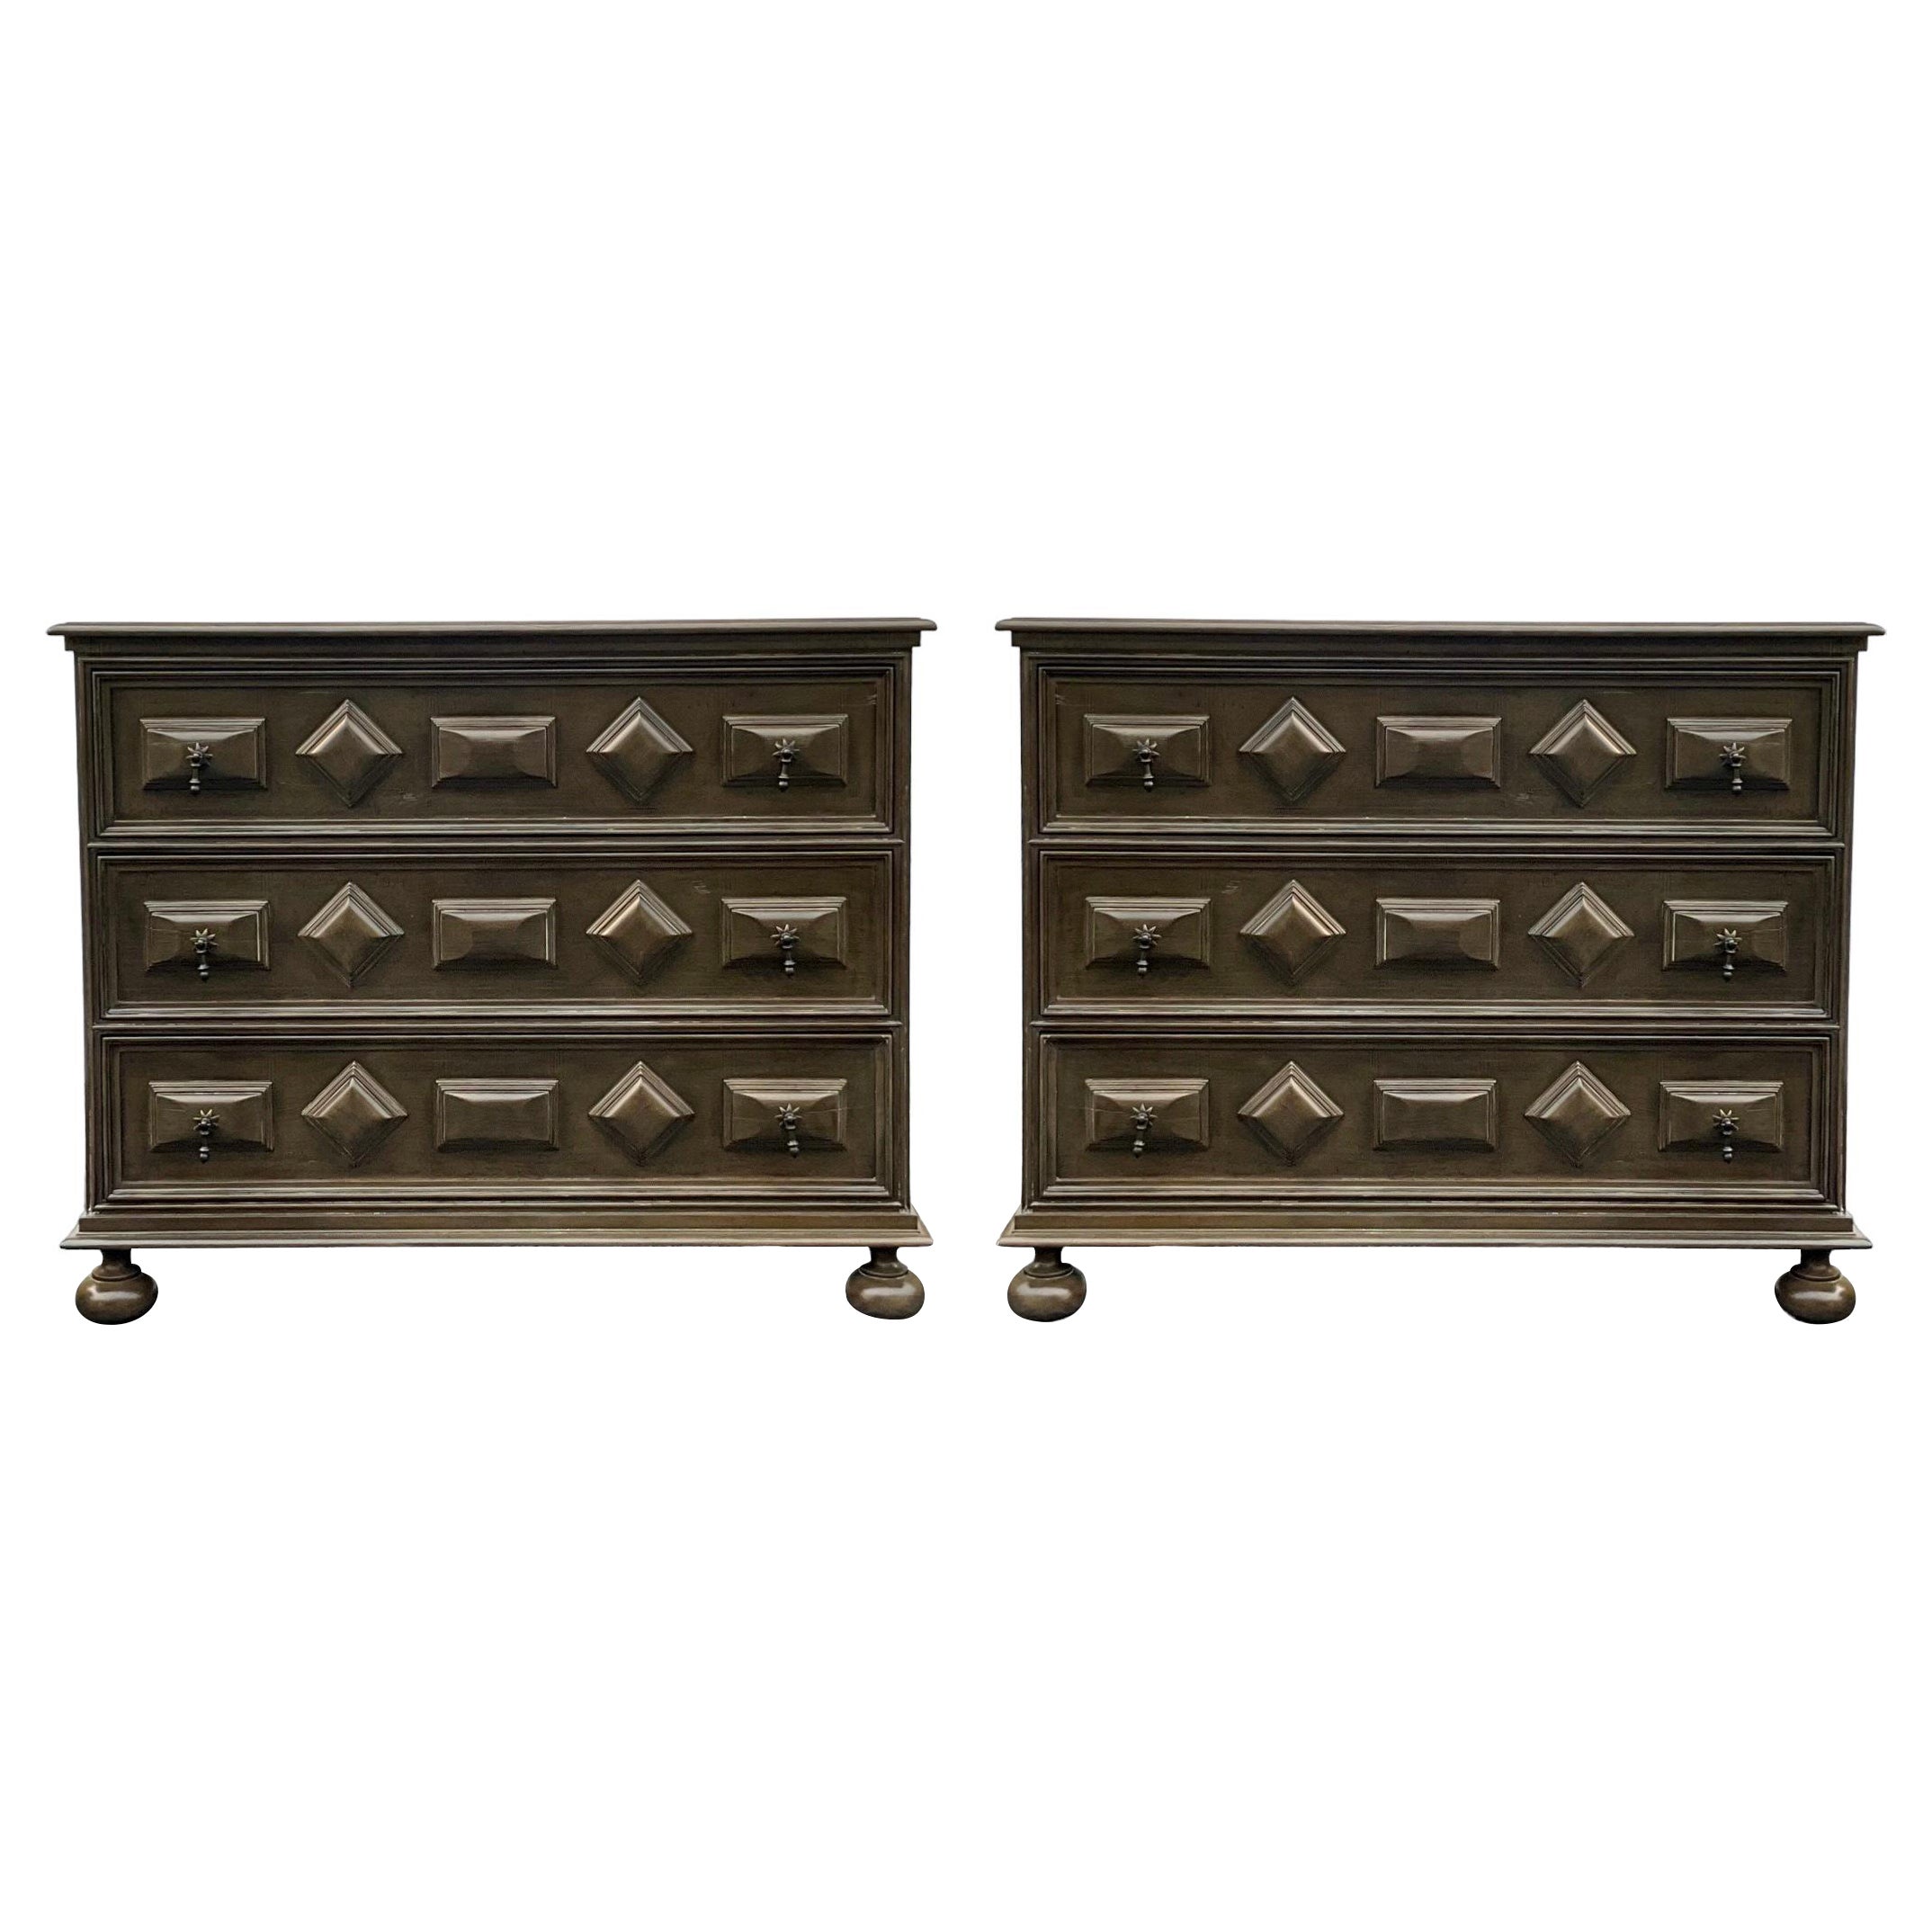 Theodore Alexander Jacobean Style Carved Alder And Brass Chests / Commode -Pair For Sale